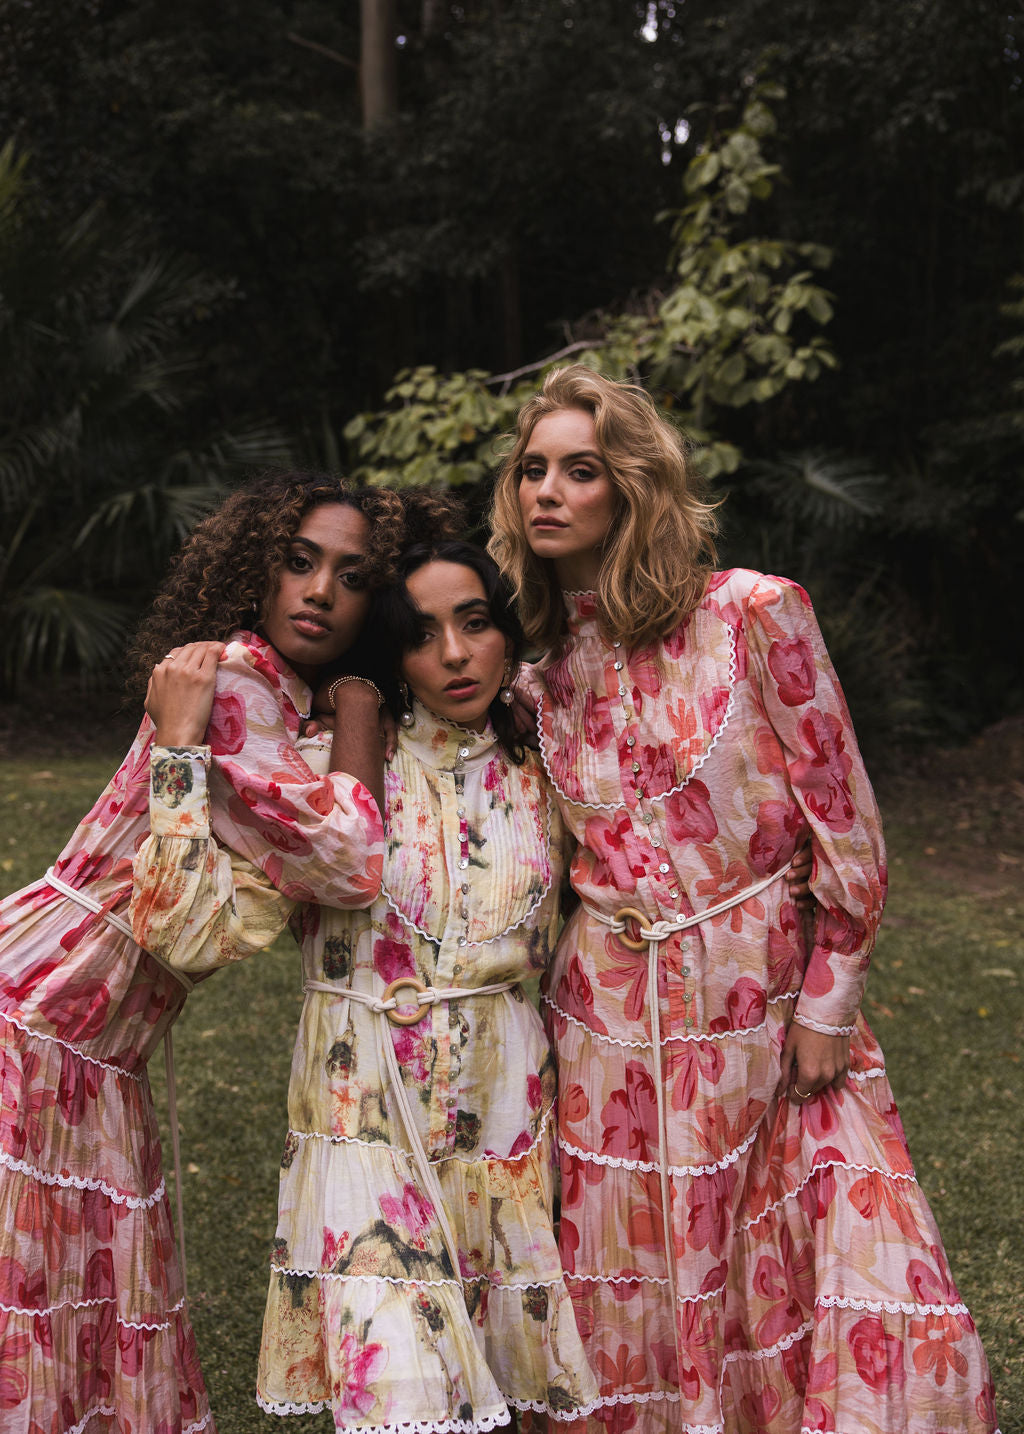 Tuscan Bloom campaign image by Analia the label of 3 beautiful women wearing romantic dresses with flowing gathered lace detailed tiers, long blouson sleeves in a viscose print of cream, peach, pink, yellow, ruby and olive blooms.